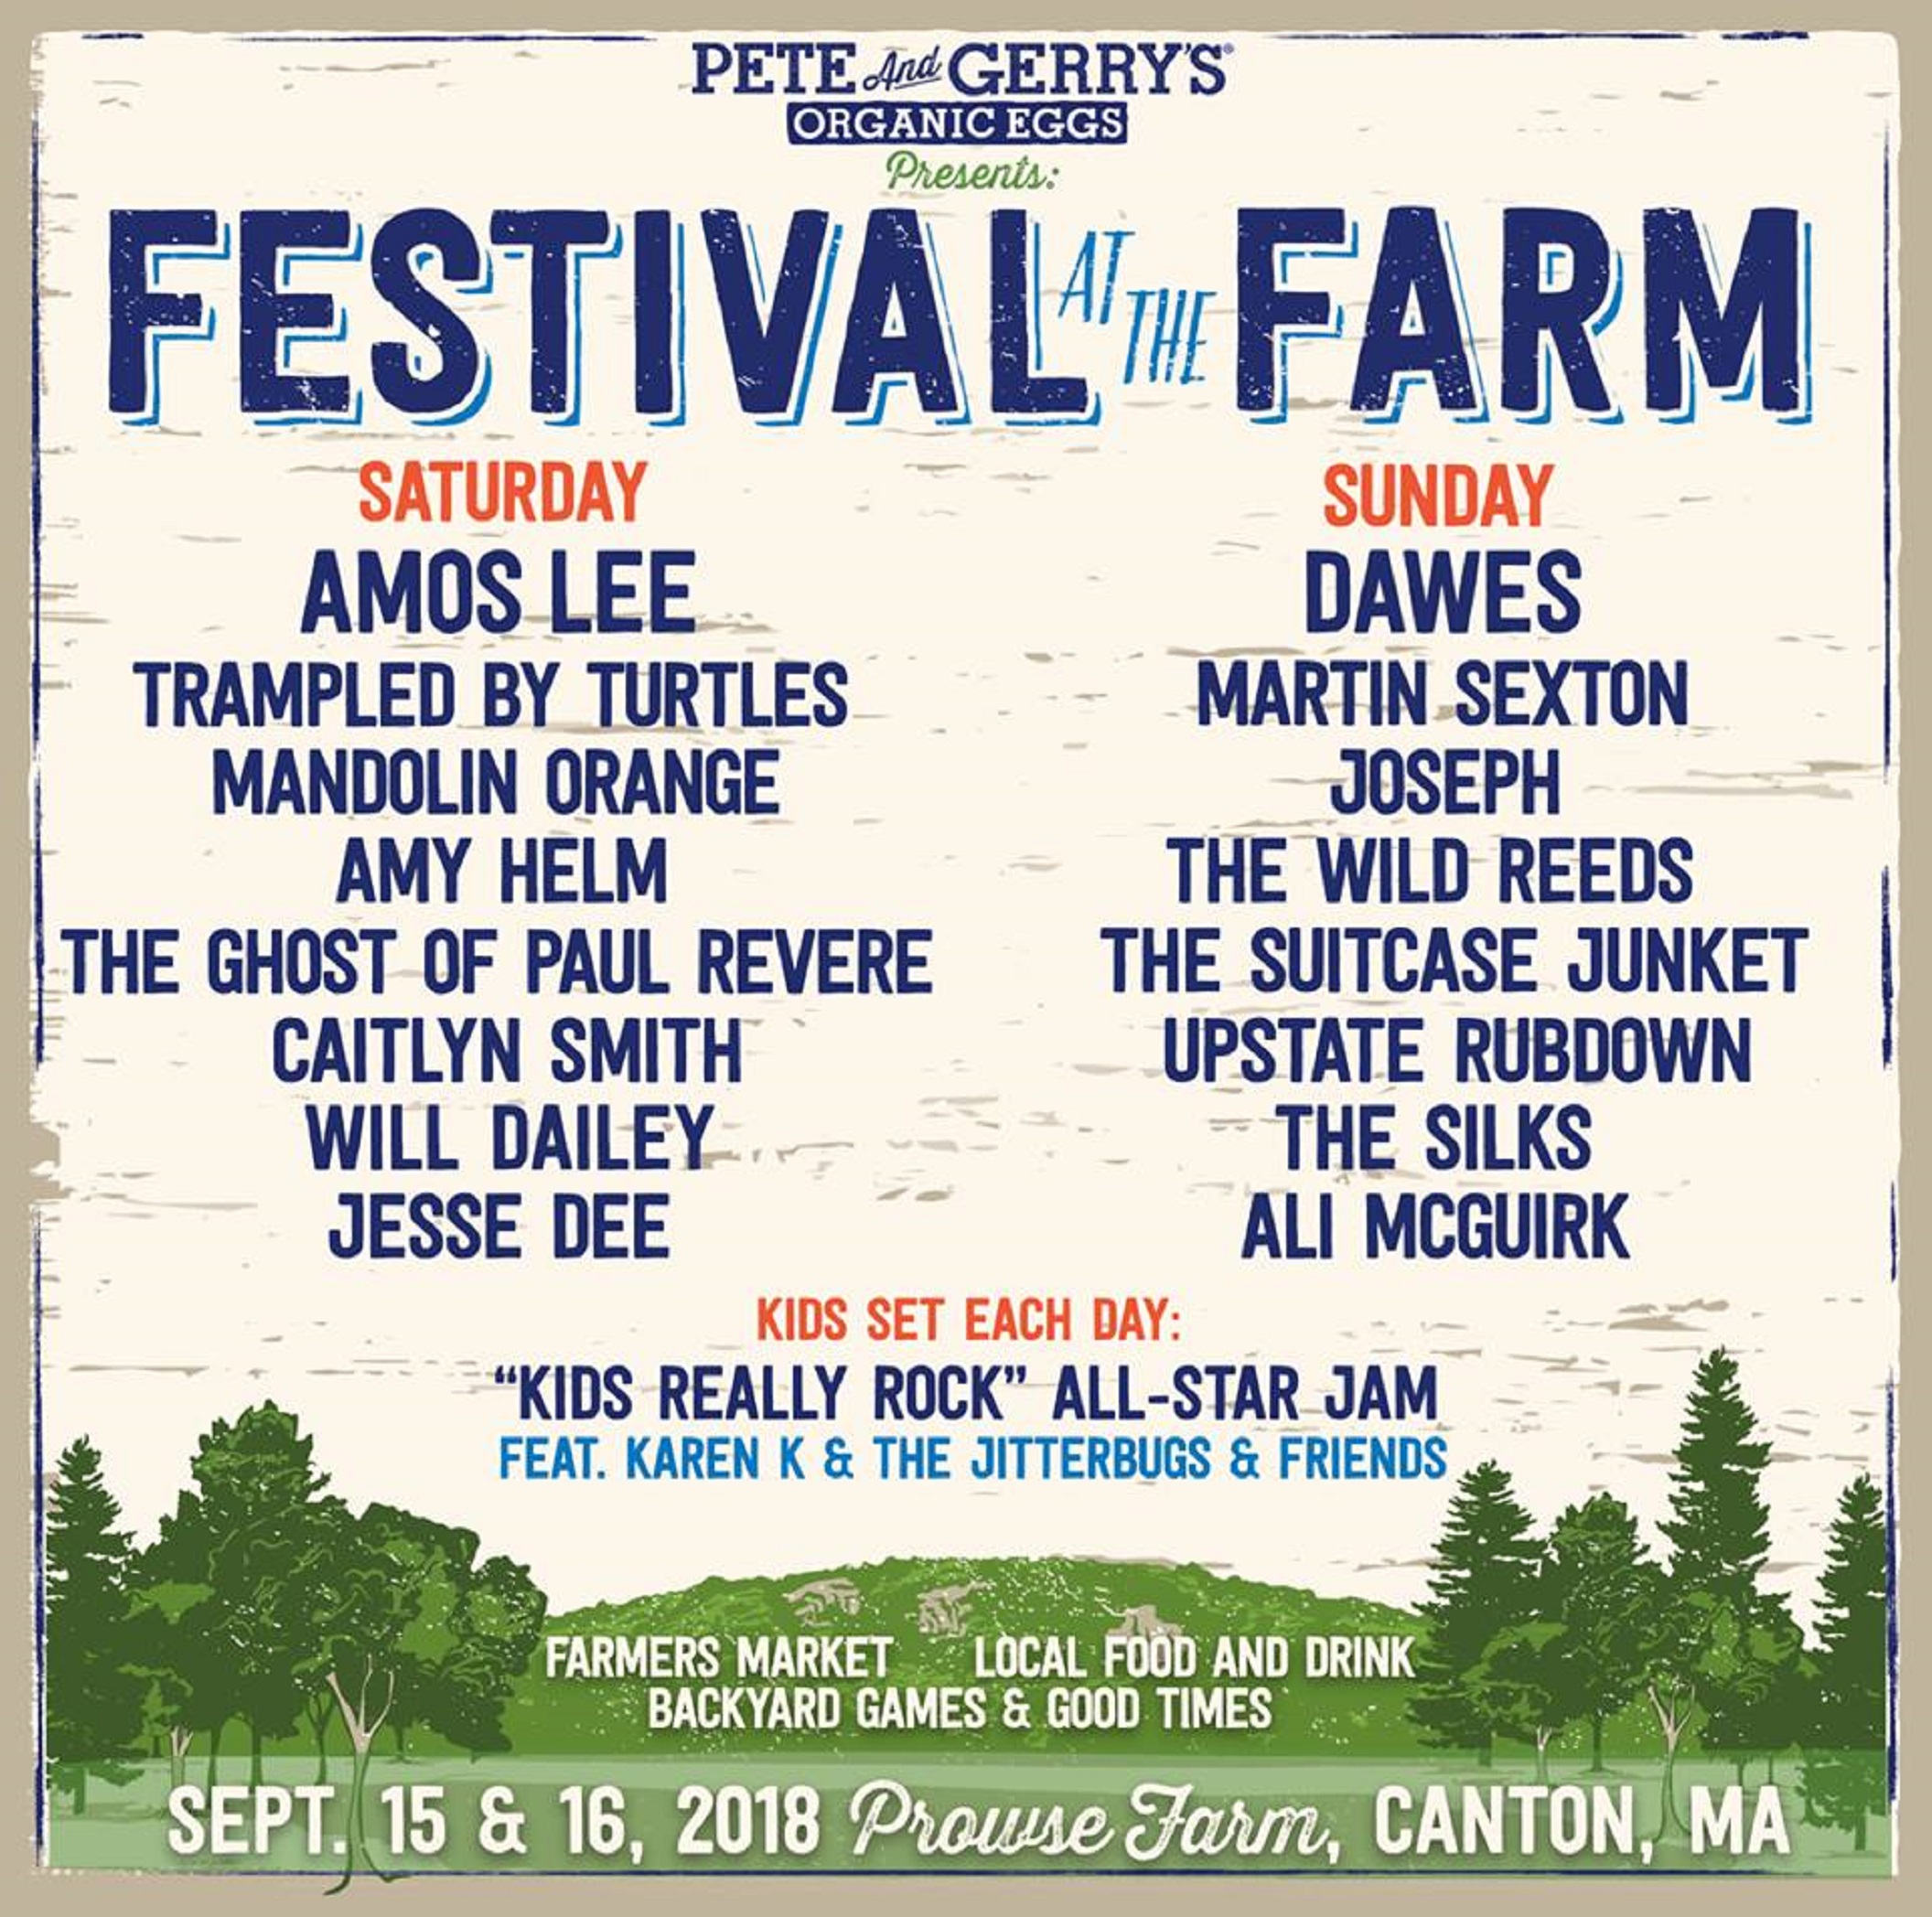 Festival at the Farm returns this Weekend!